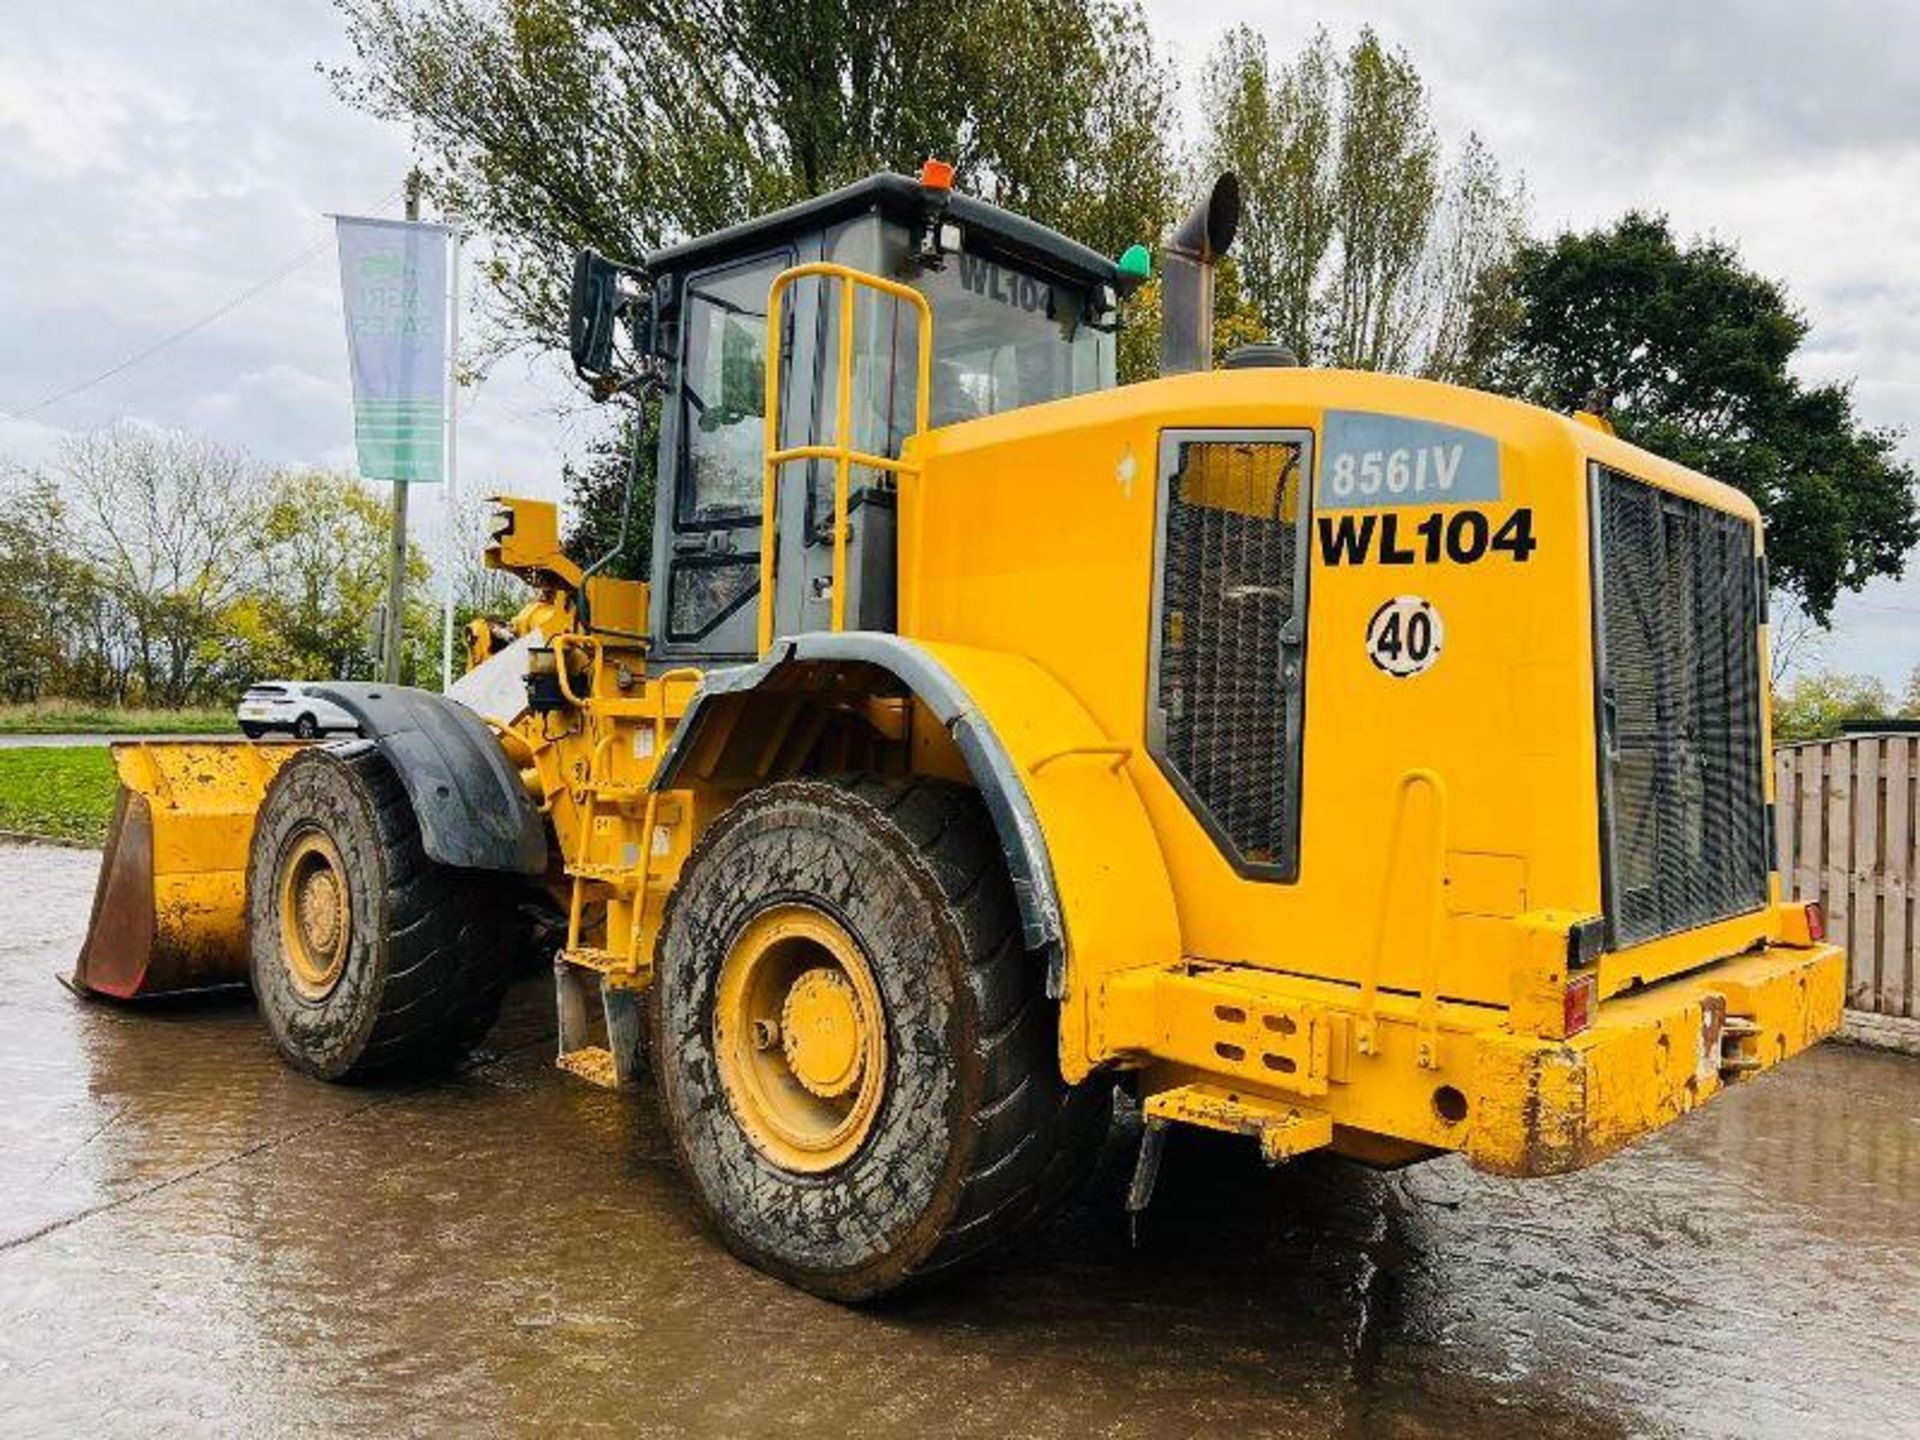 LIUGONG CLG856IV 4WD LOADING SHOVEL * YEAR 2015 * C/W AUTO LUBE & AC CABIN - Image 11 of 13